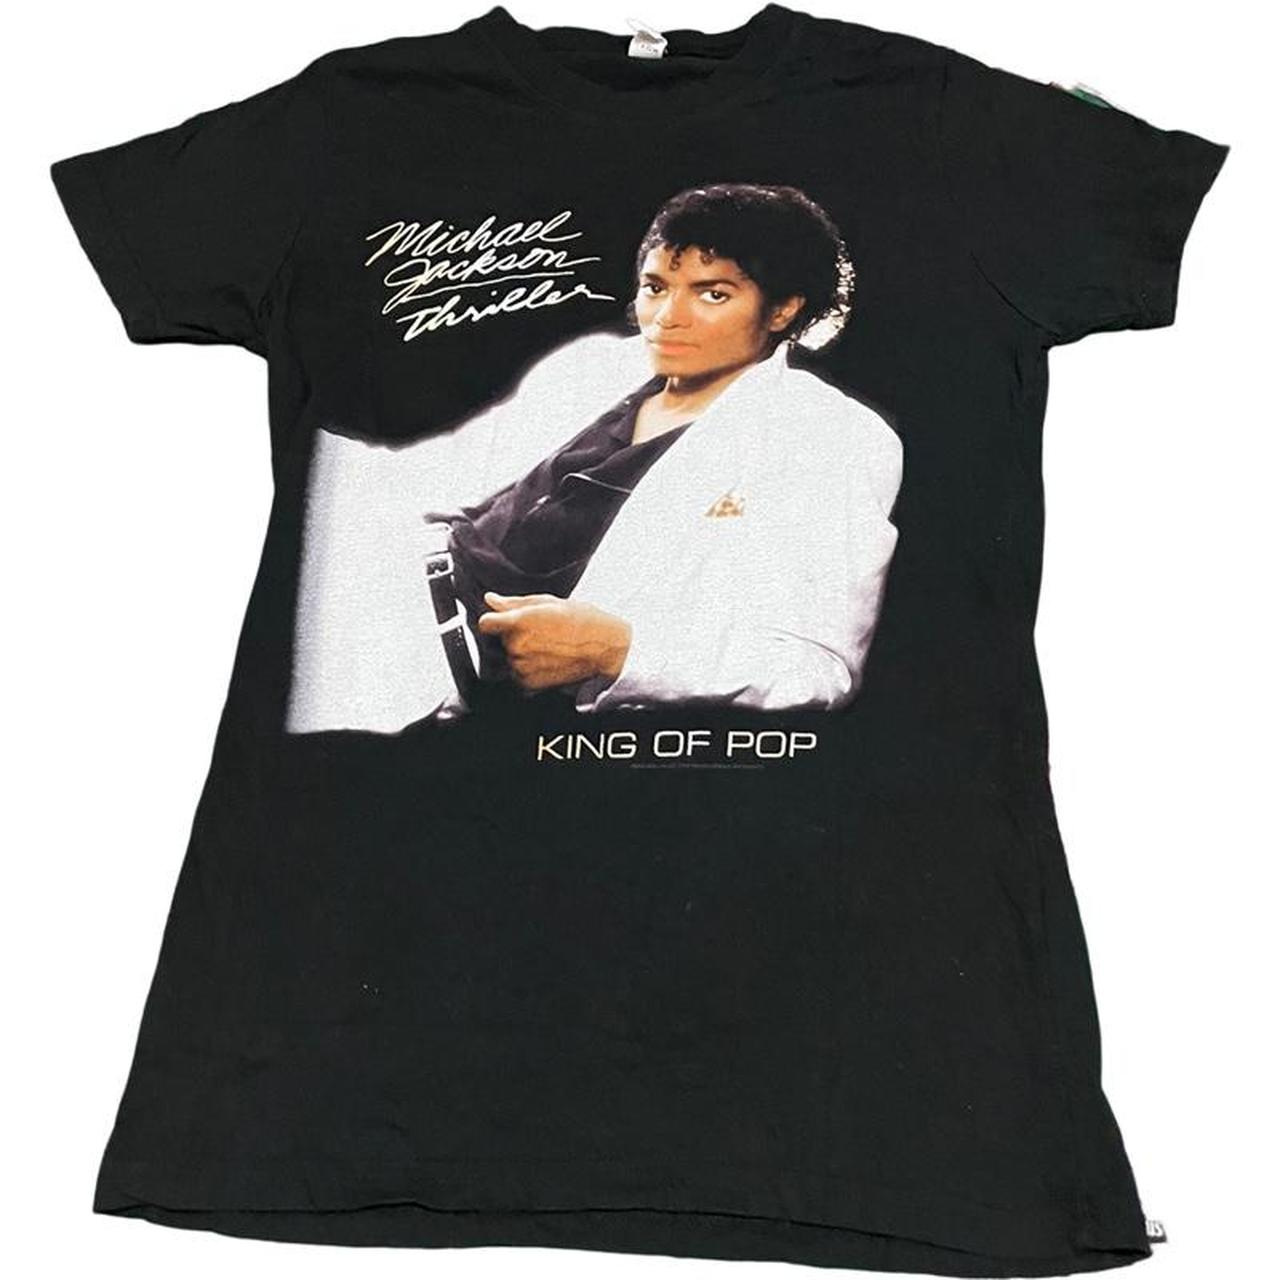  Michael Jackson Men's Thriller White Suit Slim Fit T-Shirt  Small Black : Clothing, Shoes & Jewelry